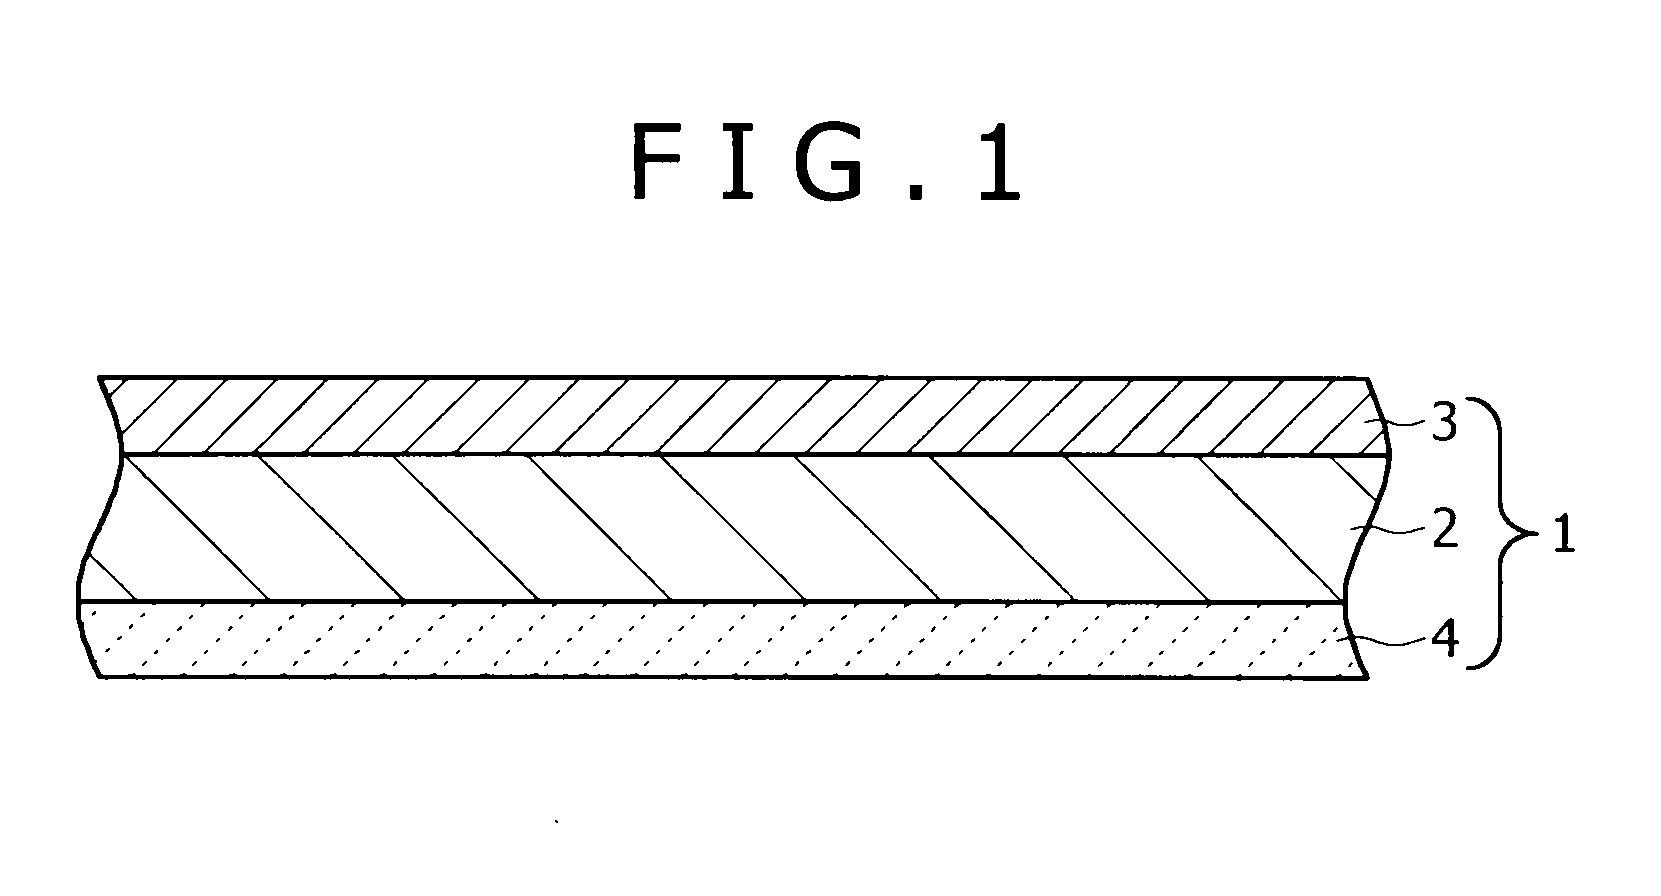 Aluminum alloy clad sheet for a heat exchanger and its production method